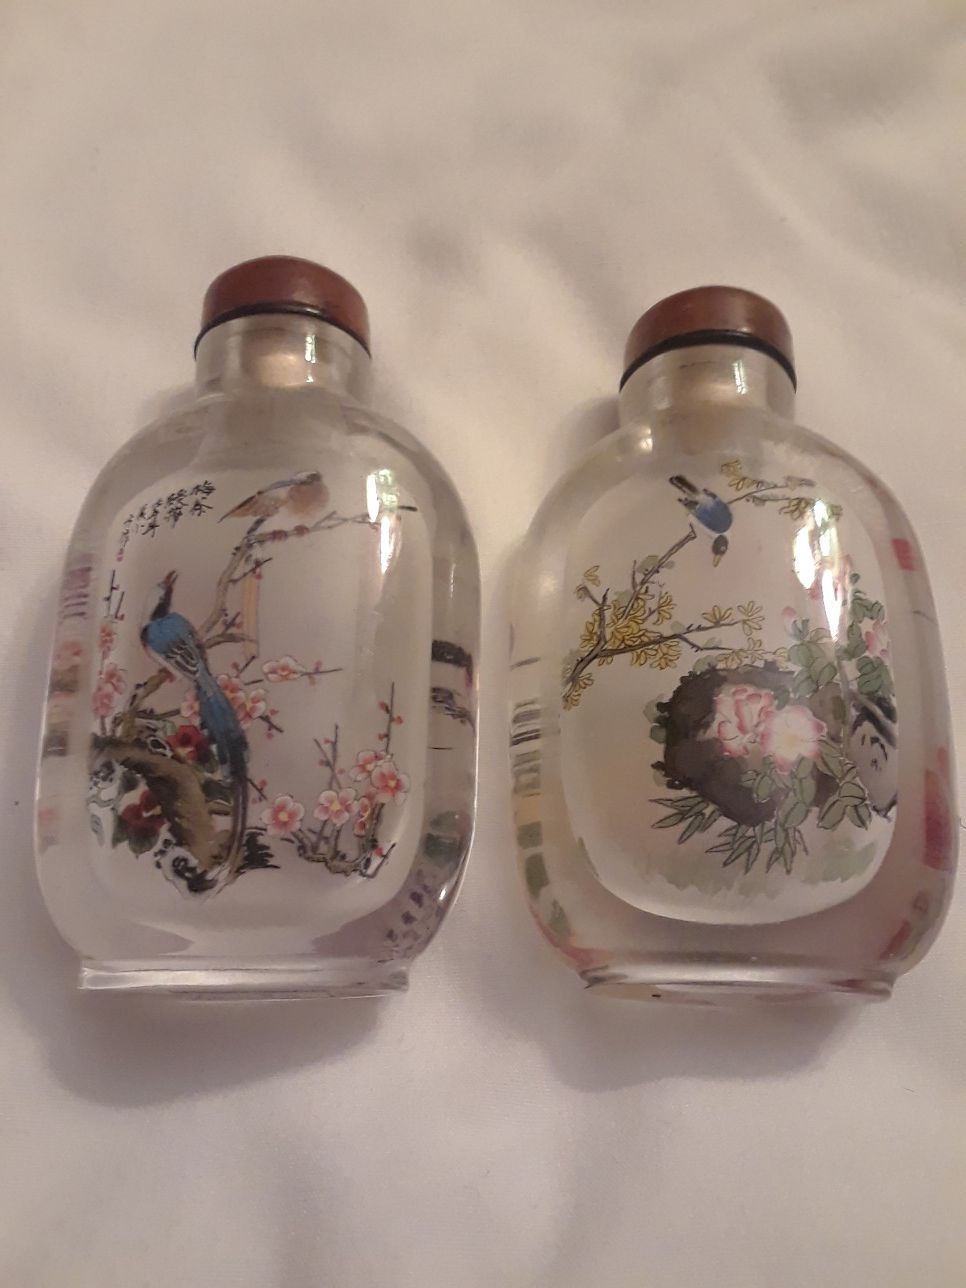 2 Antique Hand painted Chinese Perfum Bottles($80)